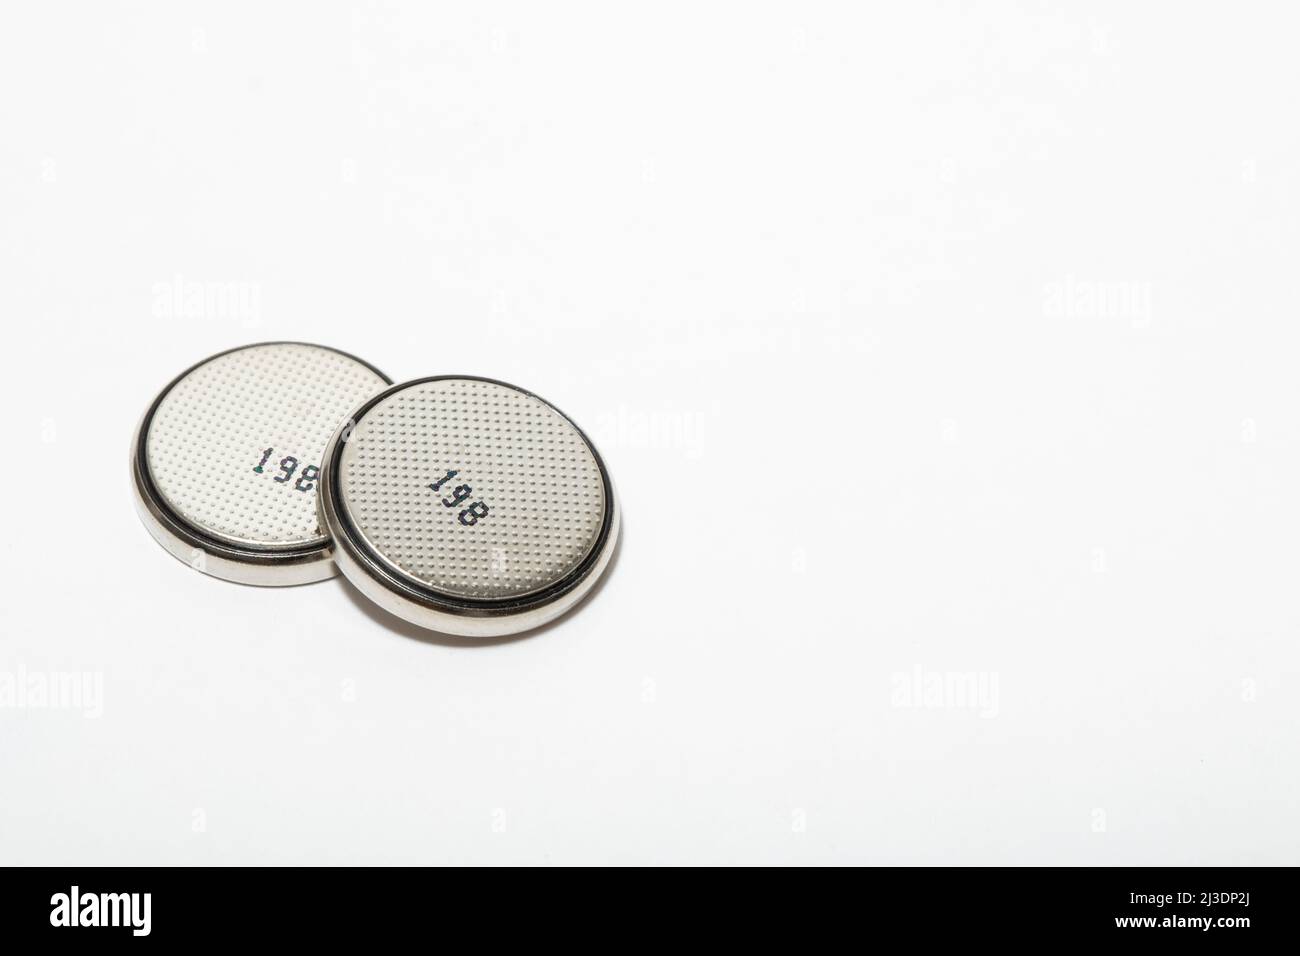 close up macro of two button cell batteries next to each other on a white background Stock Photo